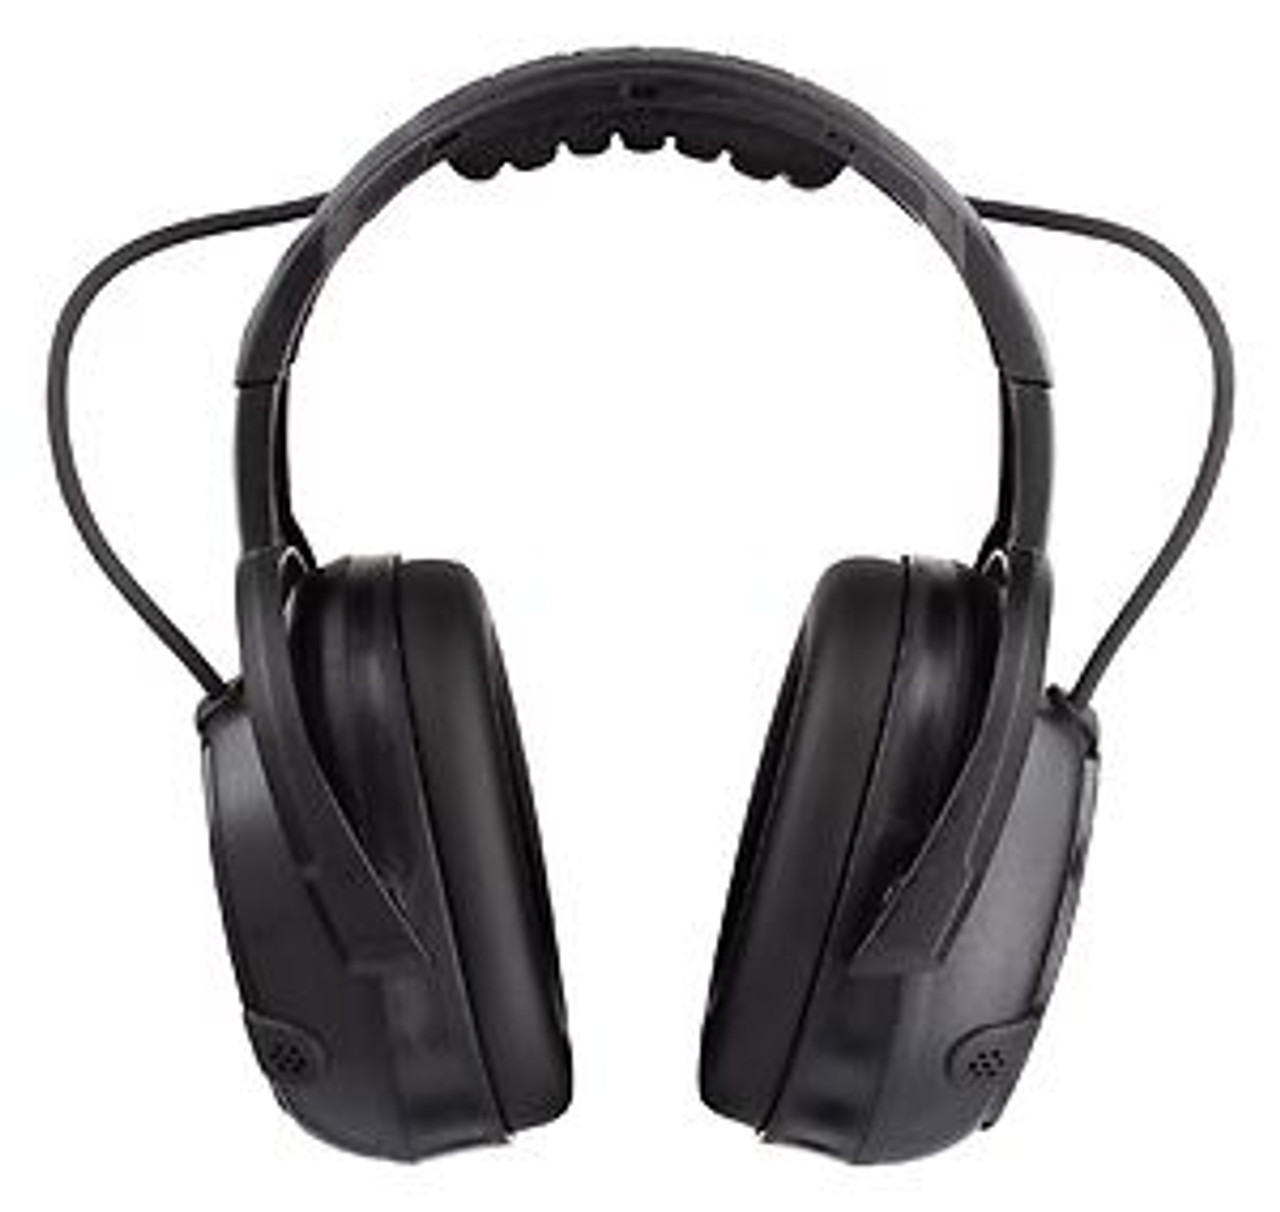 ZEKLER Ear Muffs | 412 D Class 2 AUX Input, Level Dependent System  with Over Head for Workshops, Machinery Operator to create a total tool solution for construction.